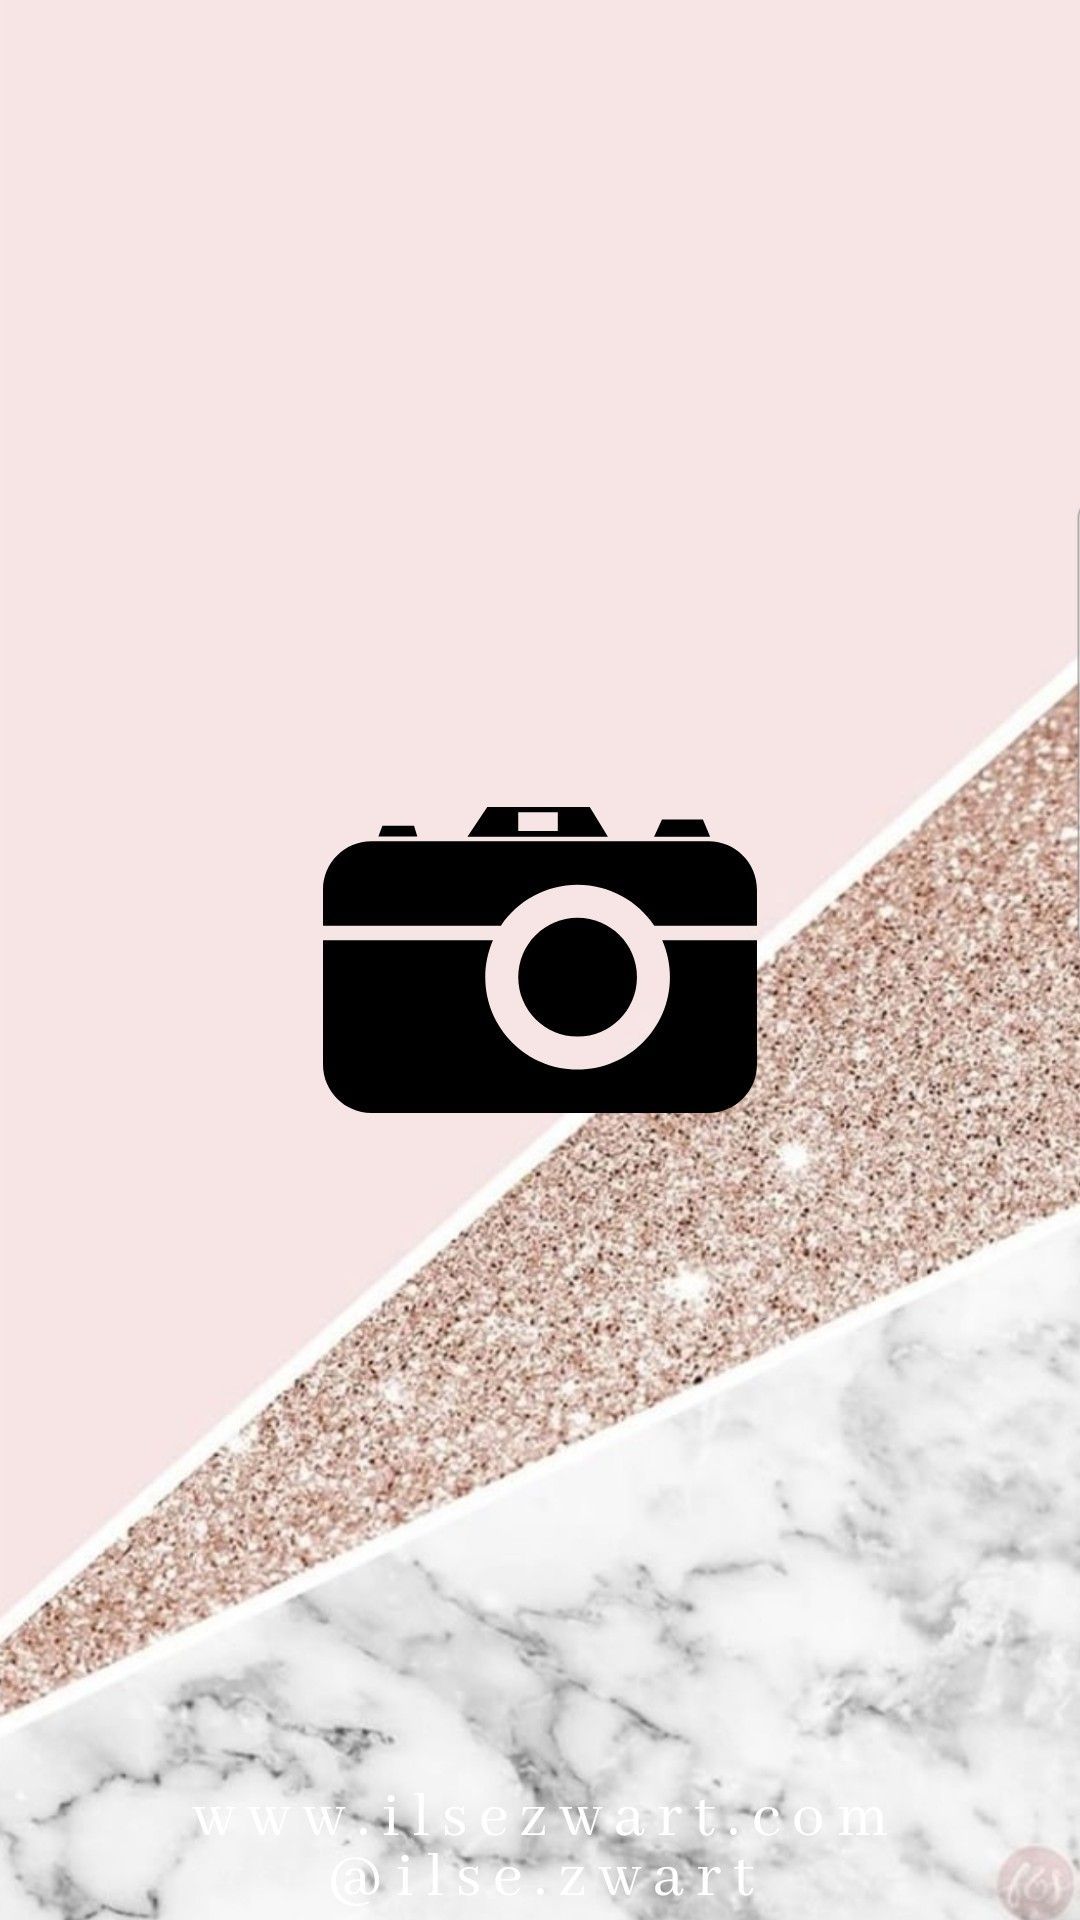 PINK GLITTER MARBLE HIGHLIGHT ICONS BY ilsezwart.com